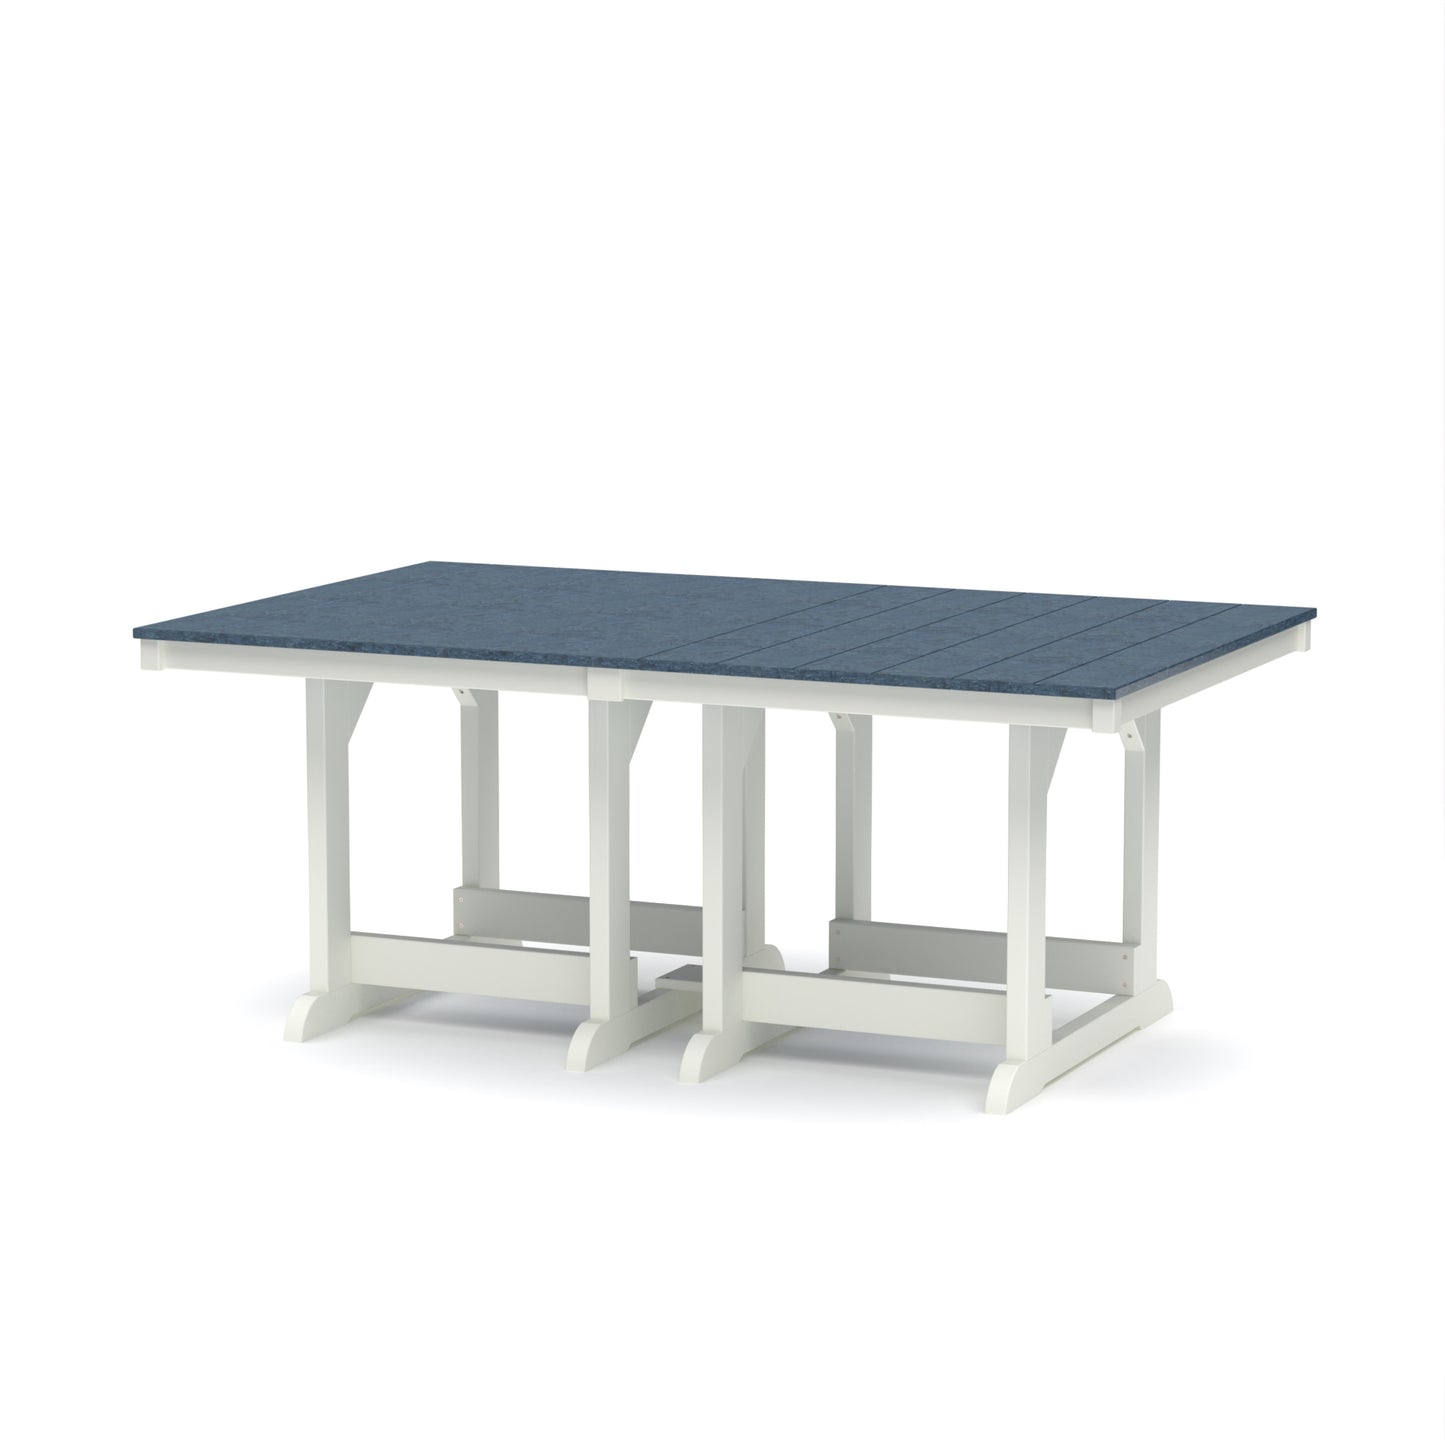 Wildridge Outdoor Recycled Plastic Heritage Table 44" x 72" - LEAD TIME TO SHIP 4 WEEKS